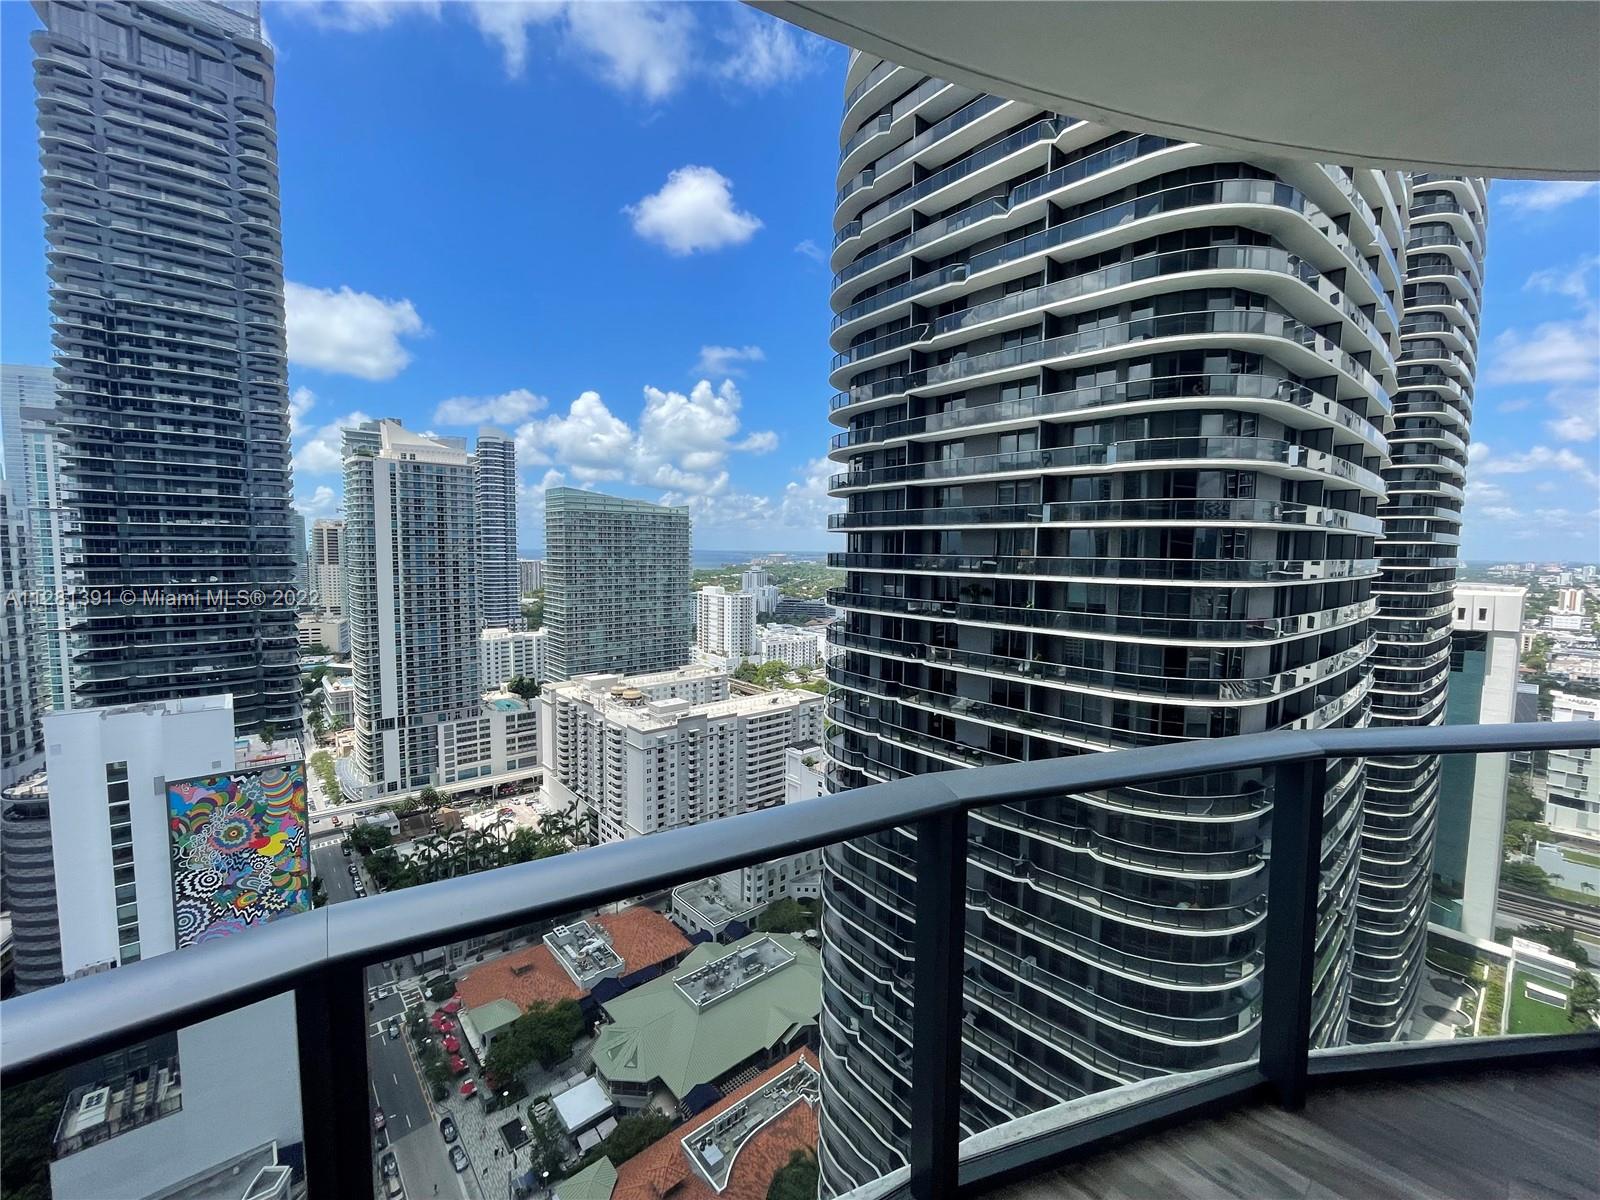 Investors Opportunity, the unit has a tenant until January 2024
SLS Lux is ideally located in the heart of Brickell, close to Mary Brickell Village and in front of Brickell City Center. Access your residence on a private elevator with biometrics technology. Enjoy ample living areas with scenic Bay & City views from this prime corner unit and expansive wrap-around balcony. Features floor-to-ceiling windows, an Italian Kitchen, California closets, top-of-the-line appliances, and a "smart" wireless control pad. Miami's newest high-rise was designed by Arquitectonica, and elegant interiors by Yabu Pushelberg